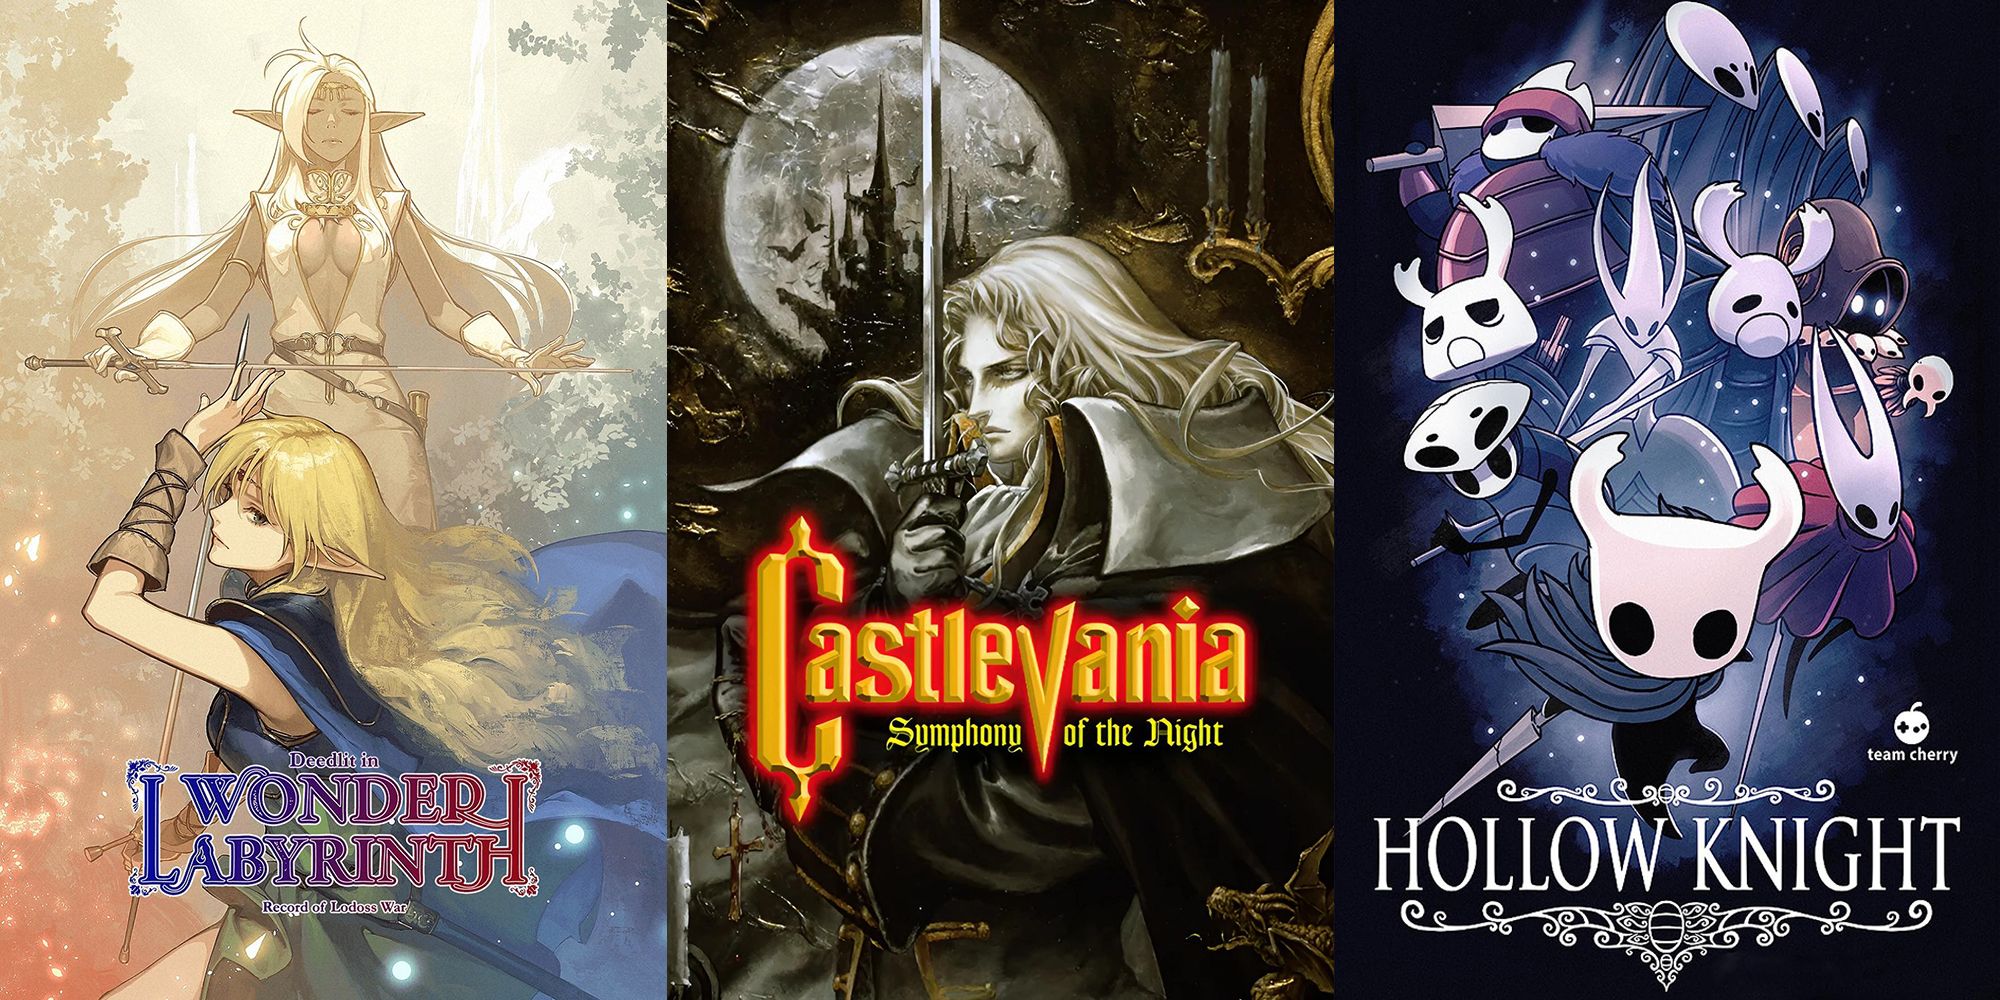 Best Castlevania Clones (Deedlit in Wonder Labyrinth and Hollow Knight)